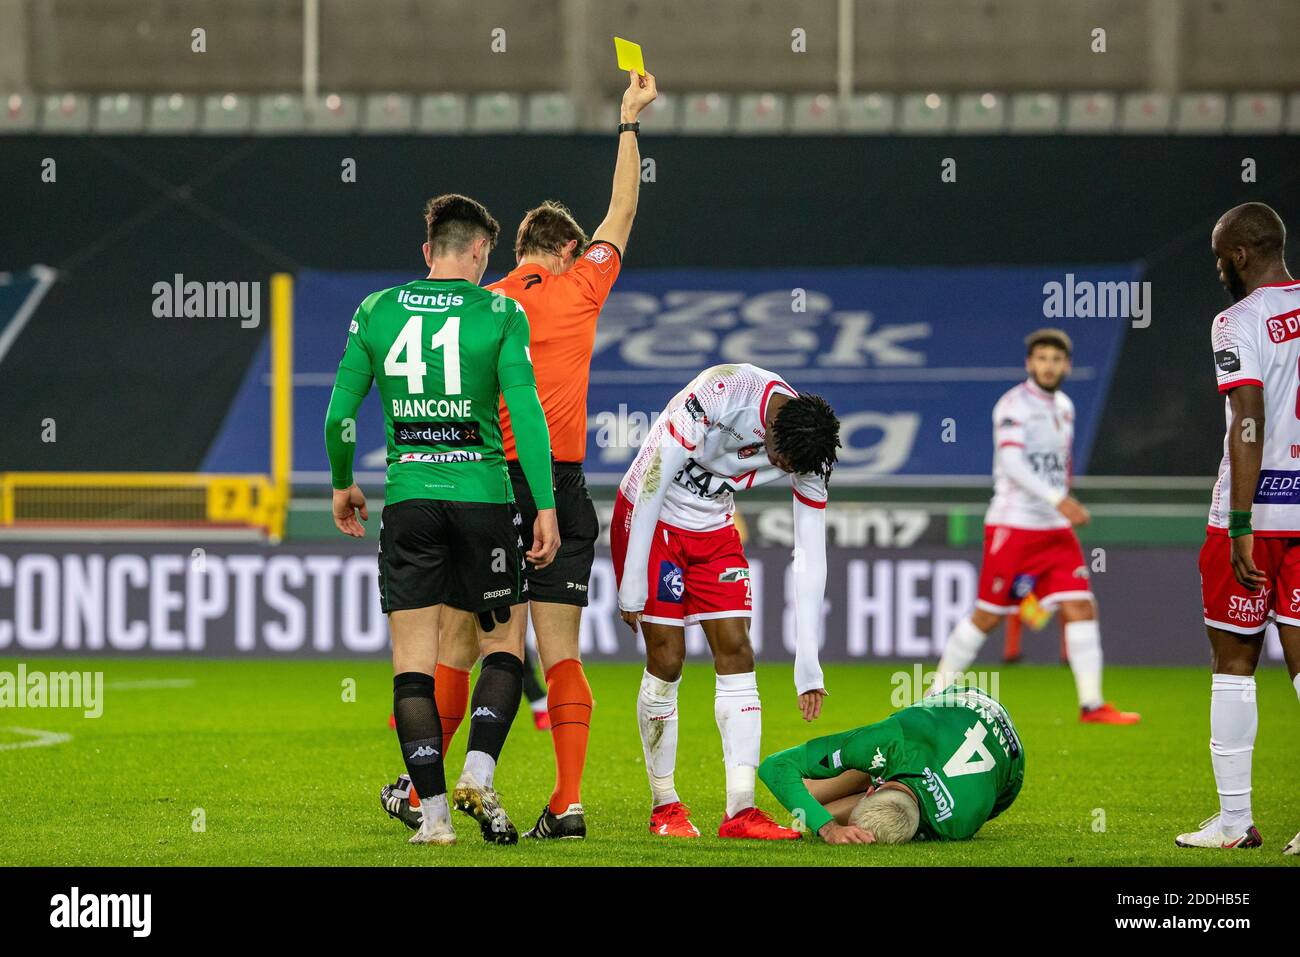 Mouscron's Eric Bocat receives a yellow card from referee Jan Boterberg during a postponed soccer match between Cercle Brugge KSV and RE Mouscron, Wed Stock Photo